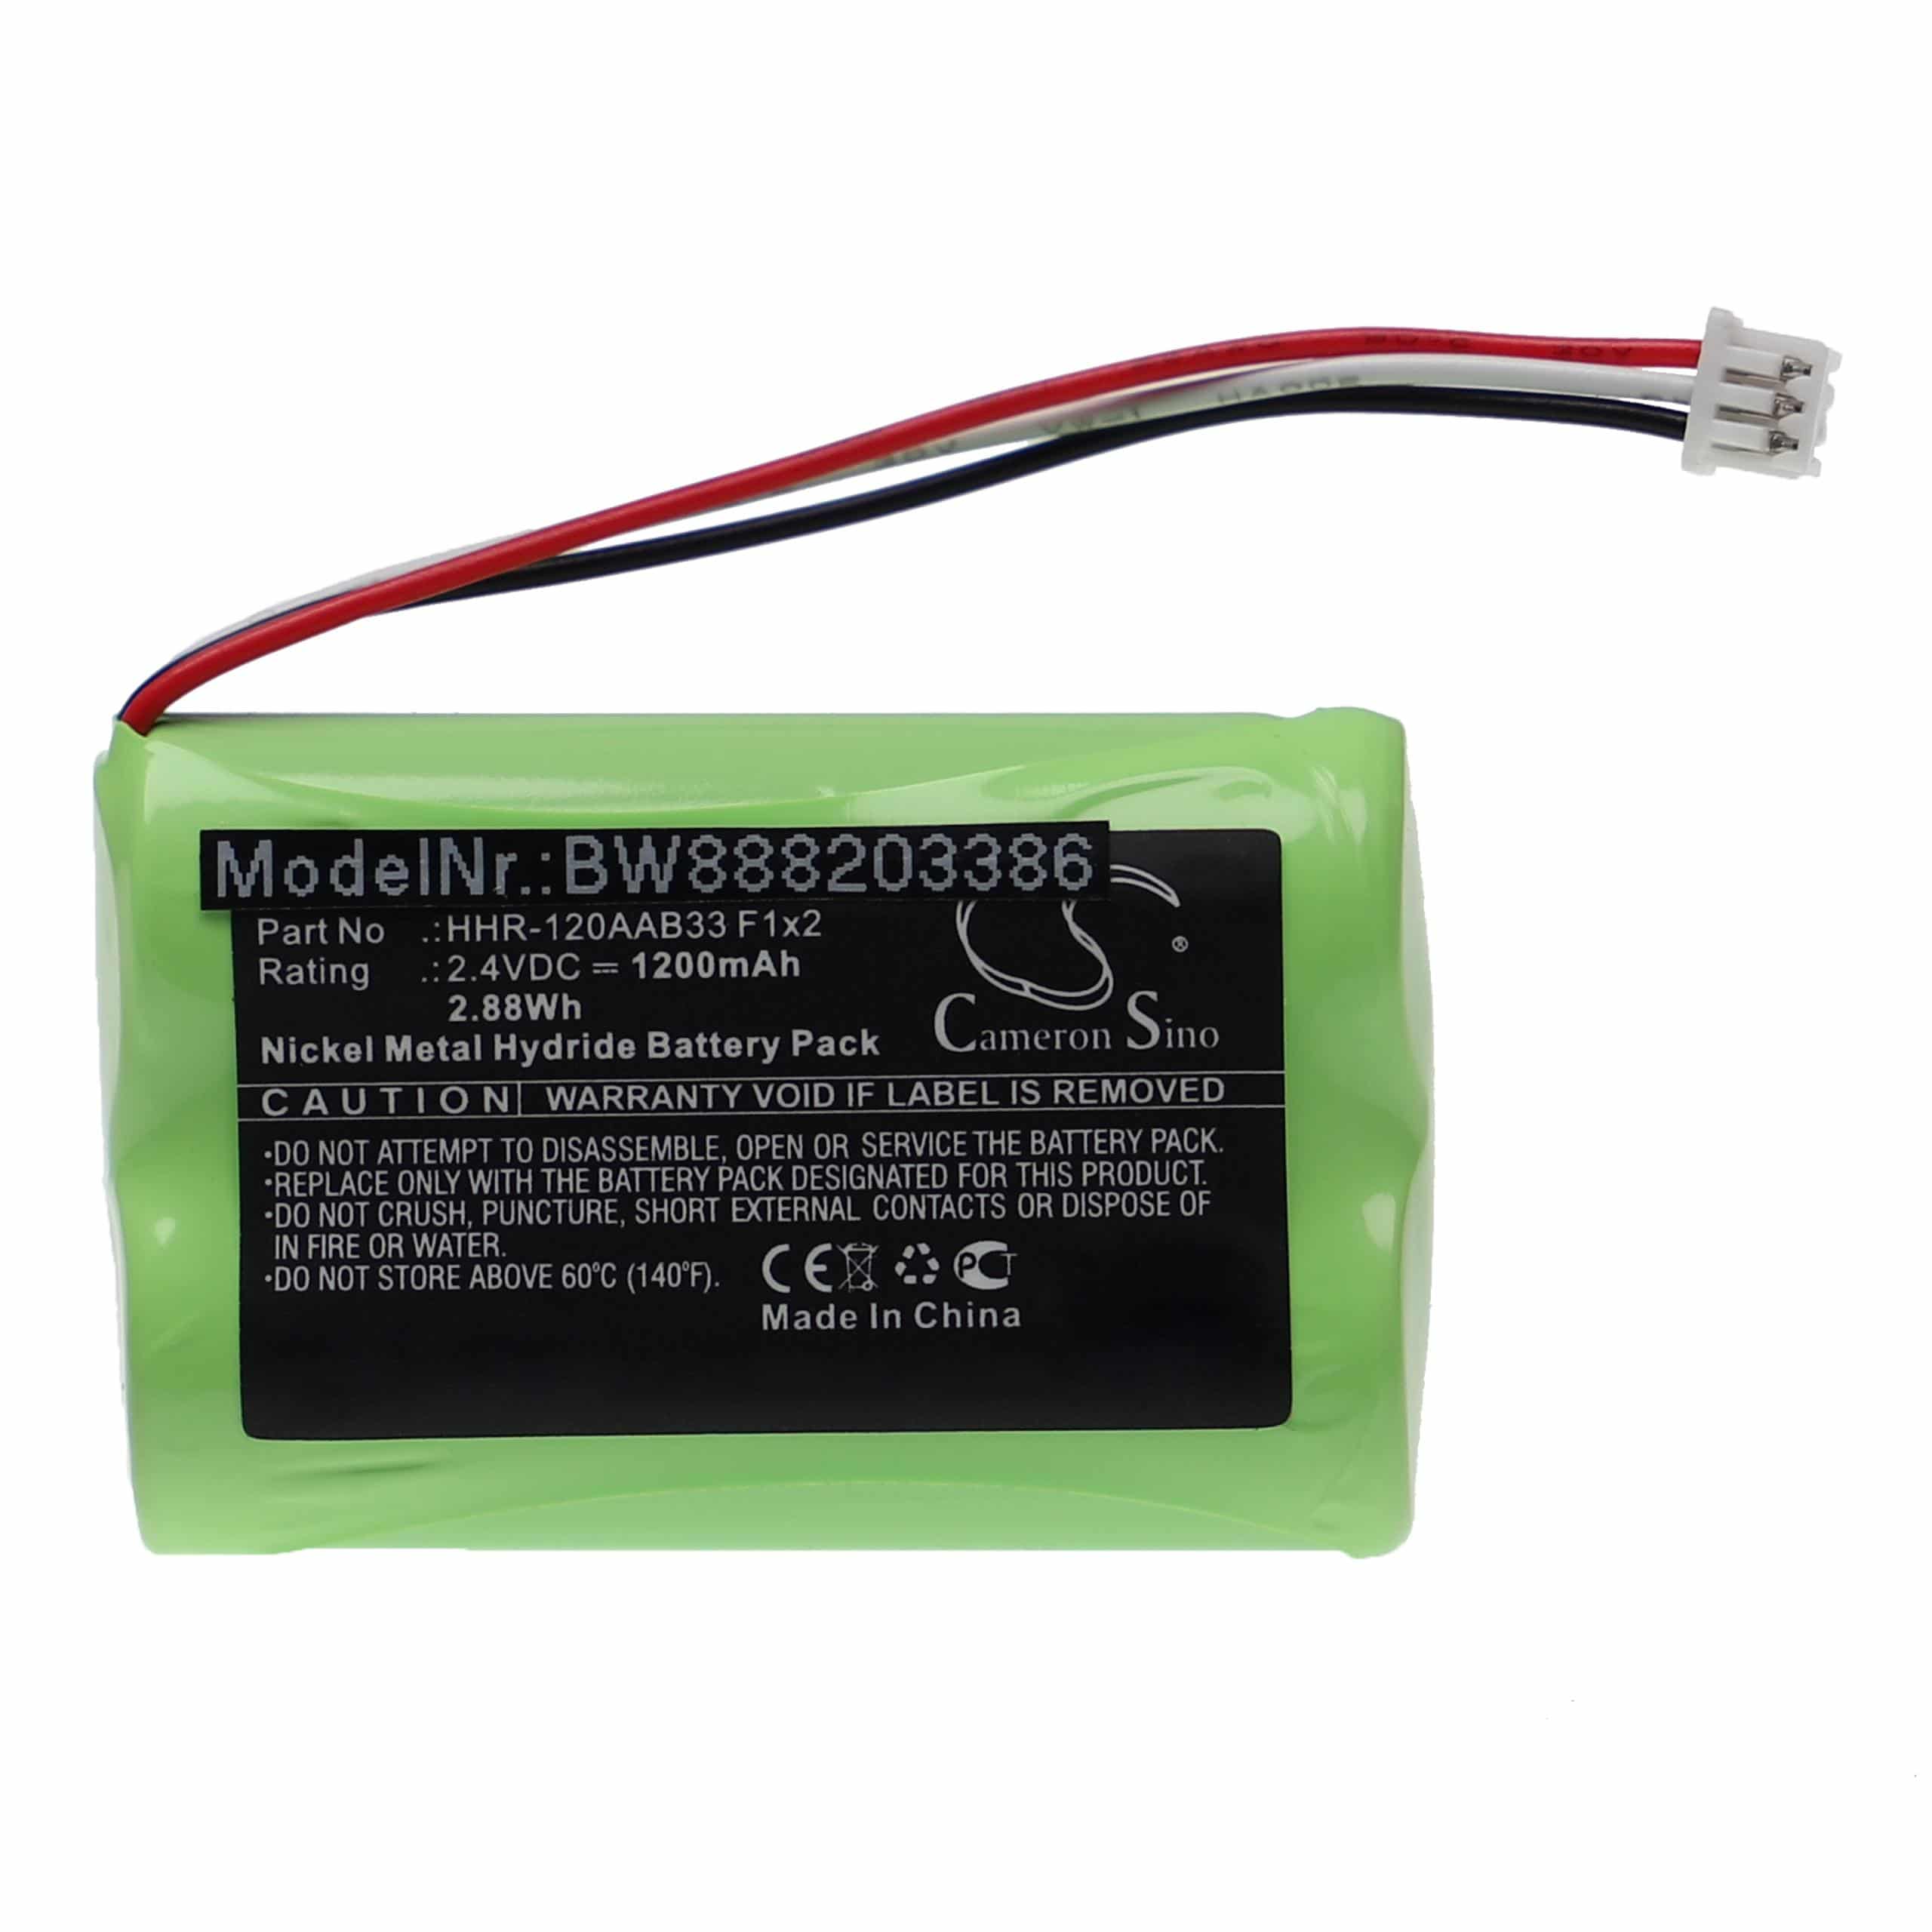 Remote Control Battery Replacement for Bang & Olufsen HHR-120AAB33 F1x2 - 1200mAh 2.4V NiMH